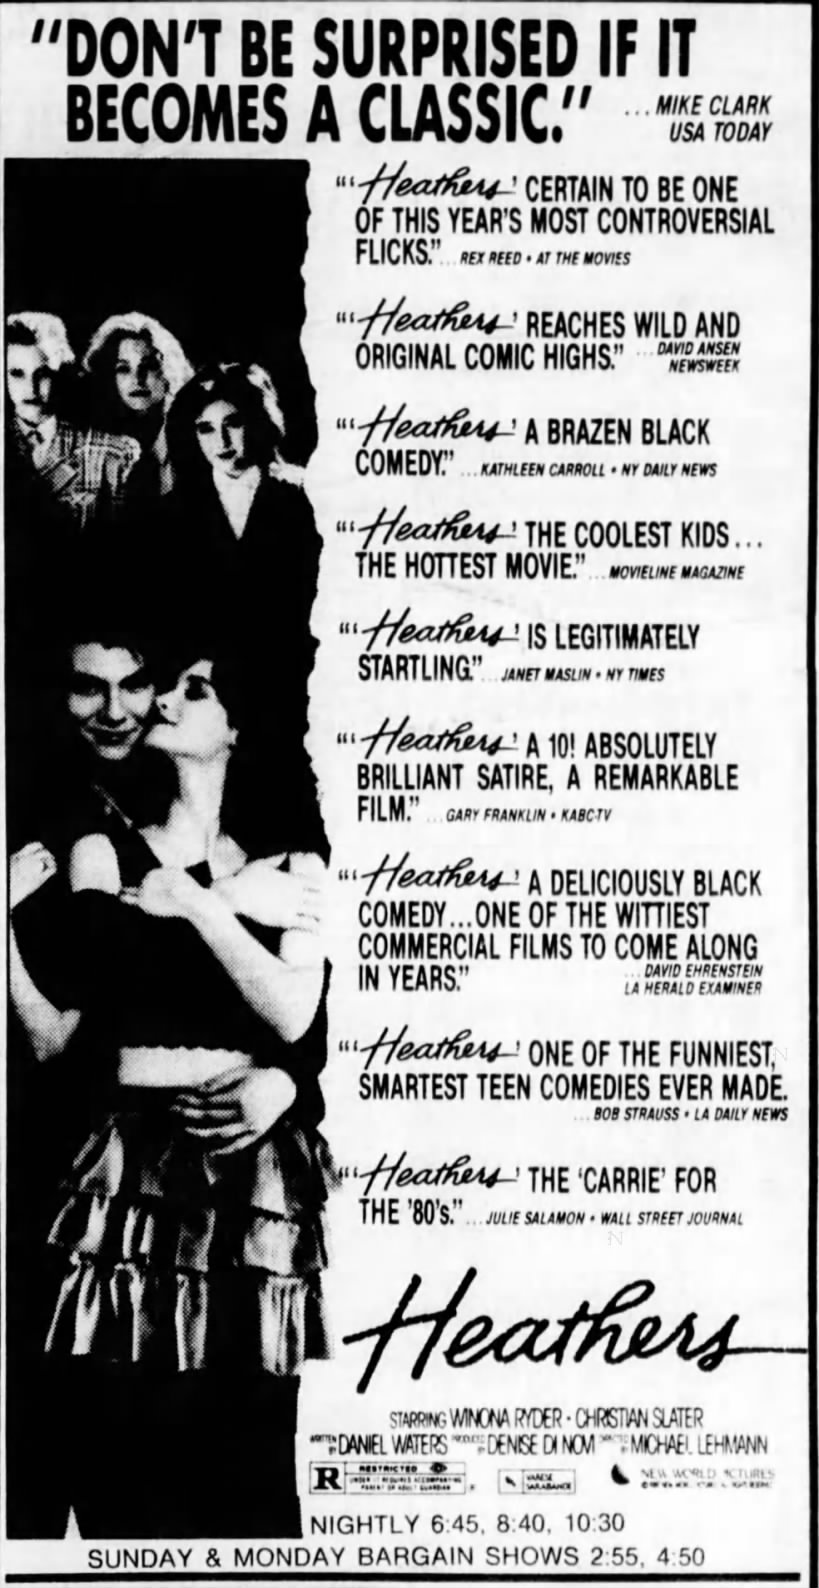 Generation X - Cultural History - Movies - Heathers